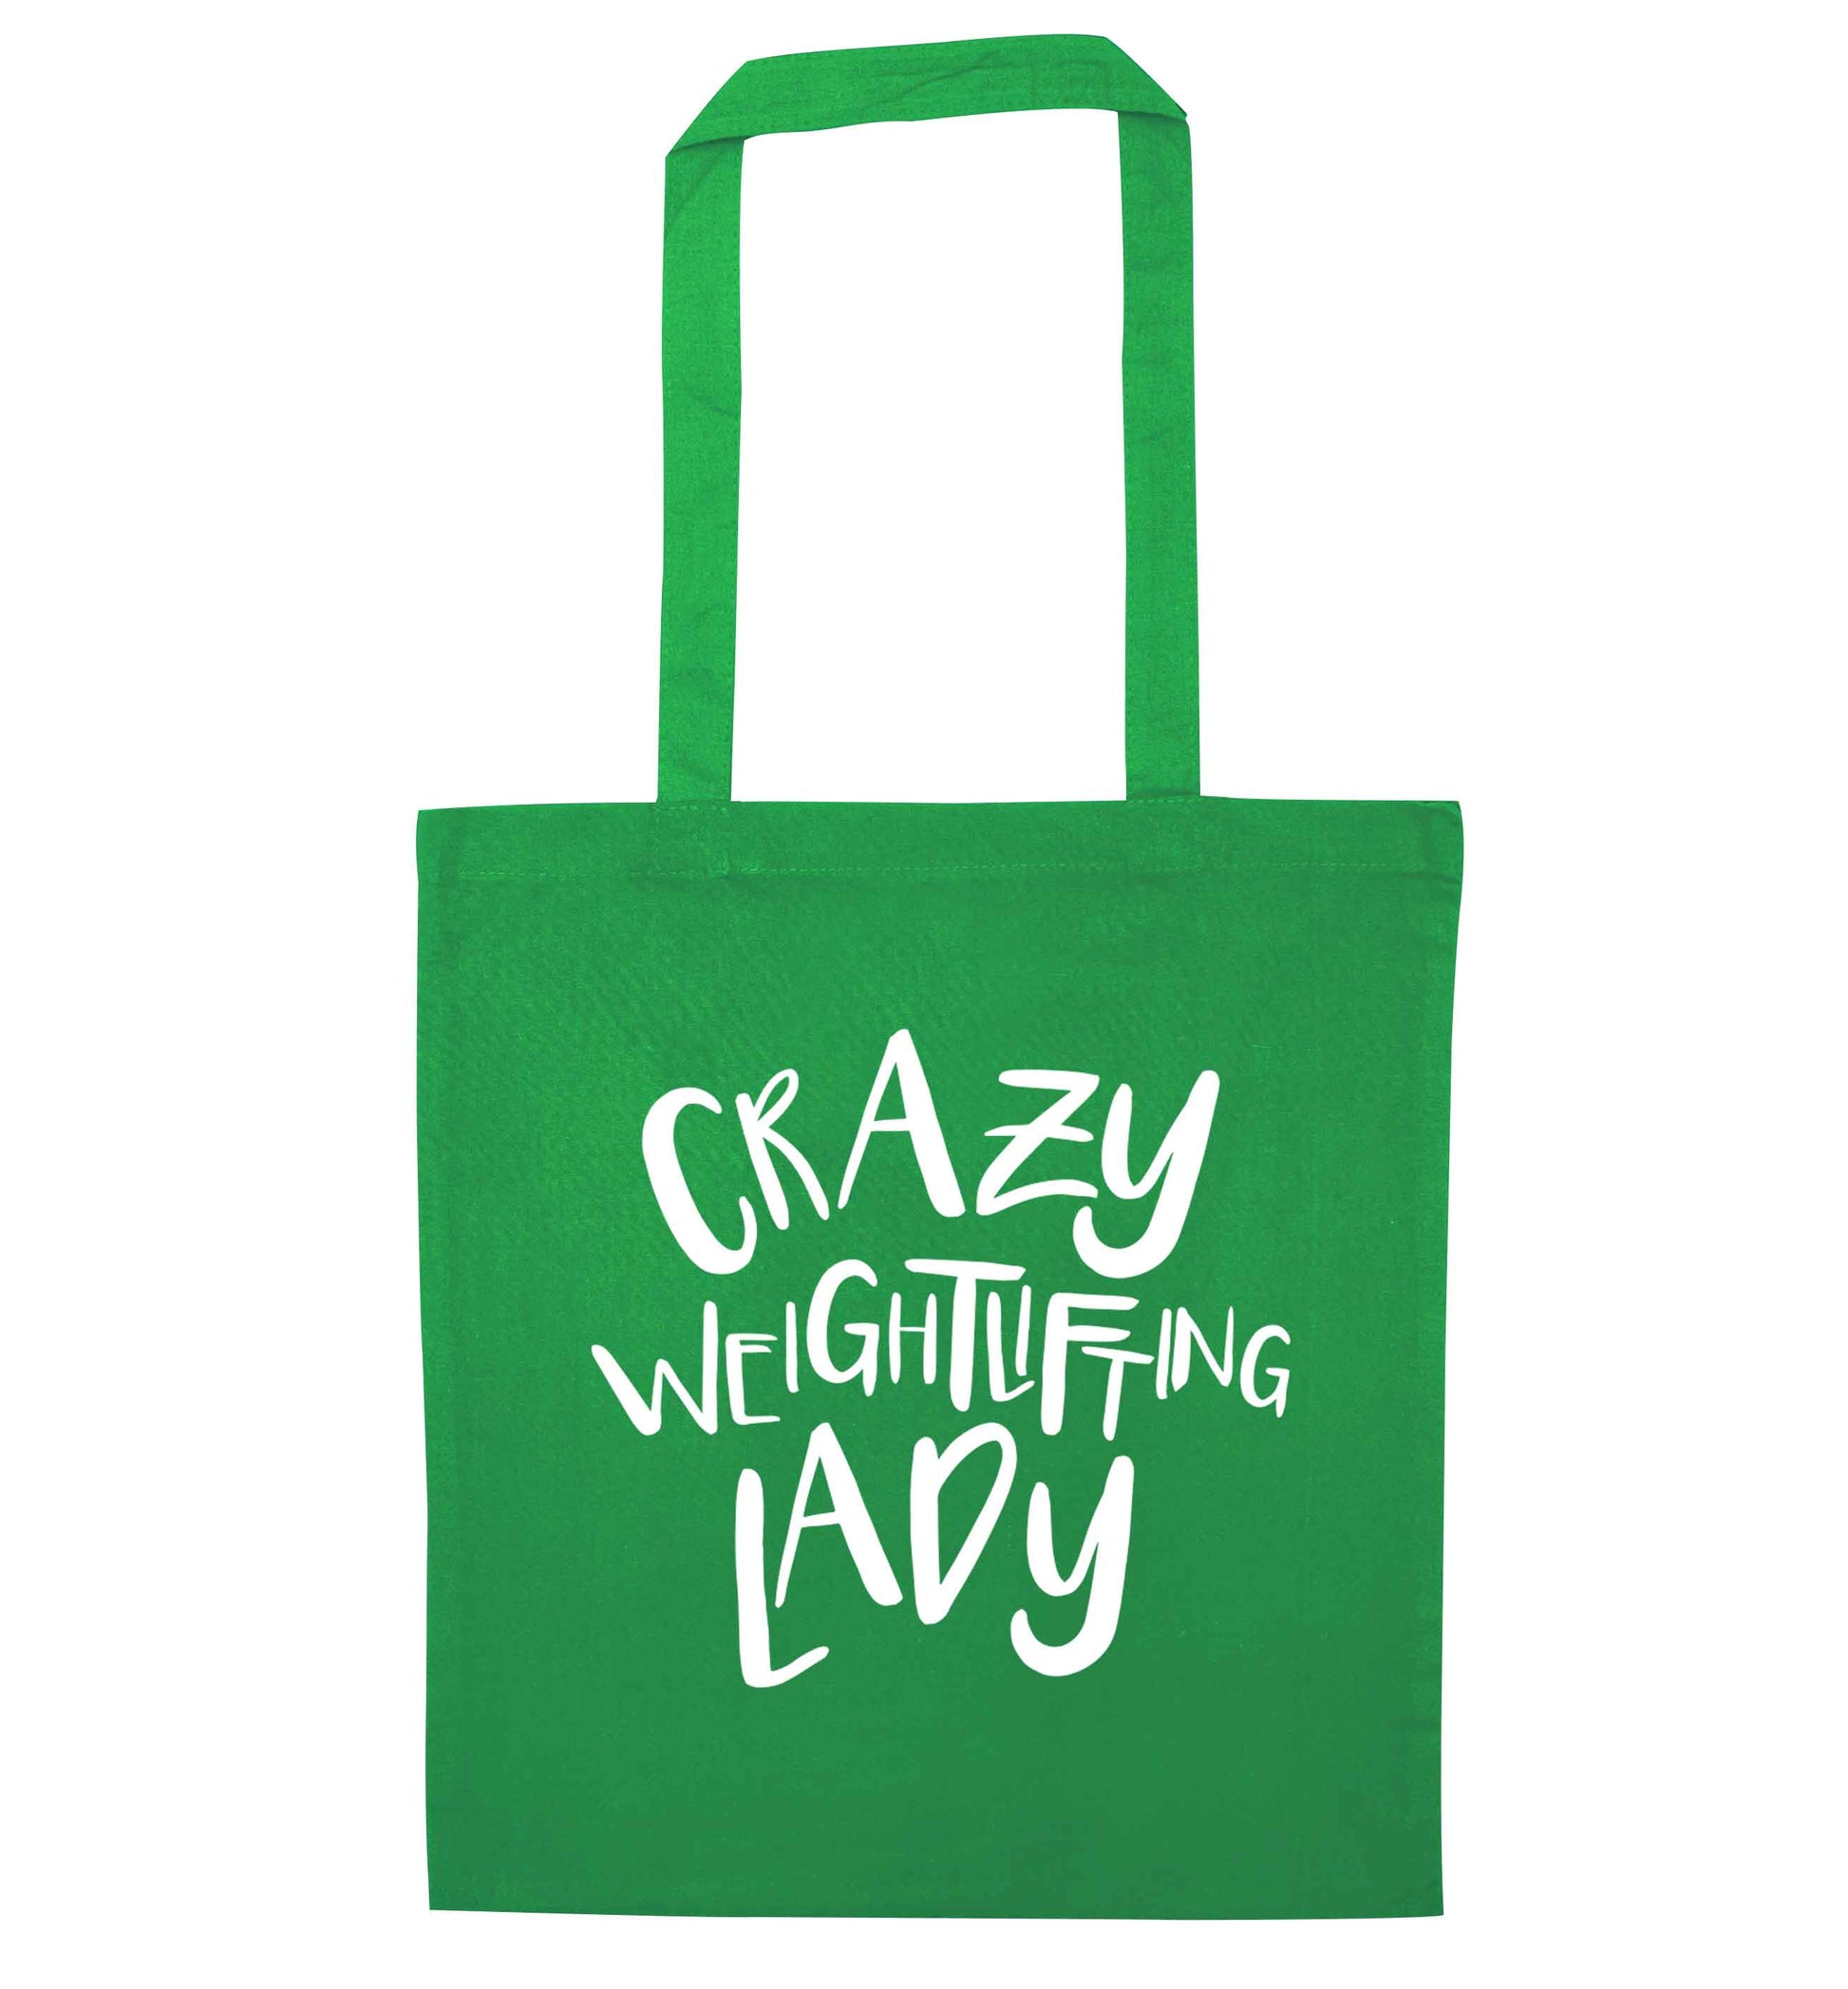 Crazy weightlifting lady green tote bag